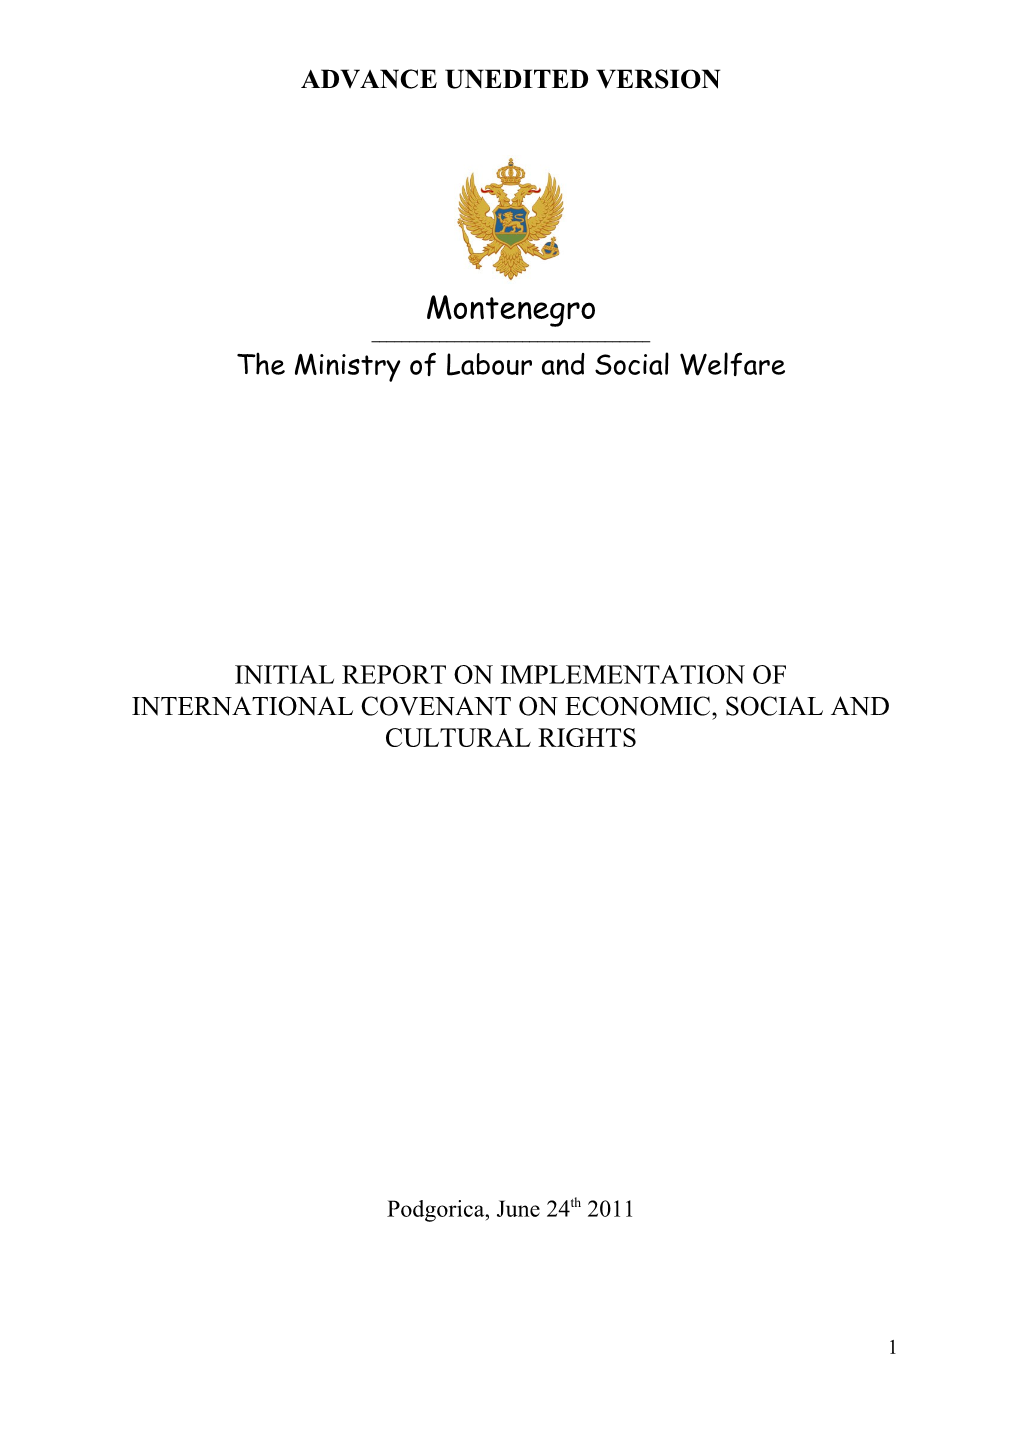 Commitee for Economic, Social and Cultural Rights